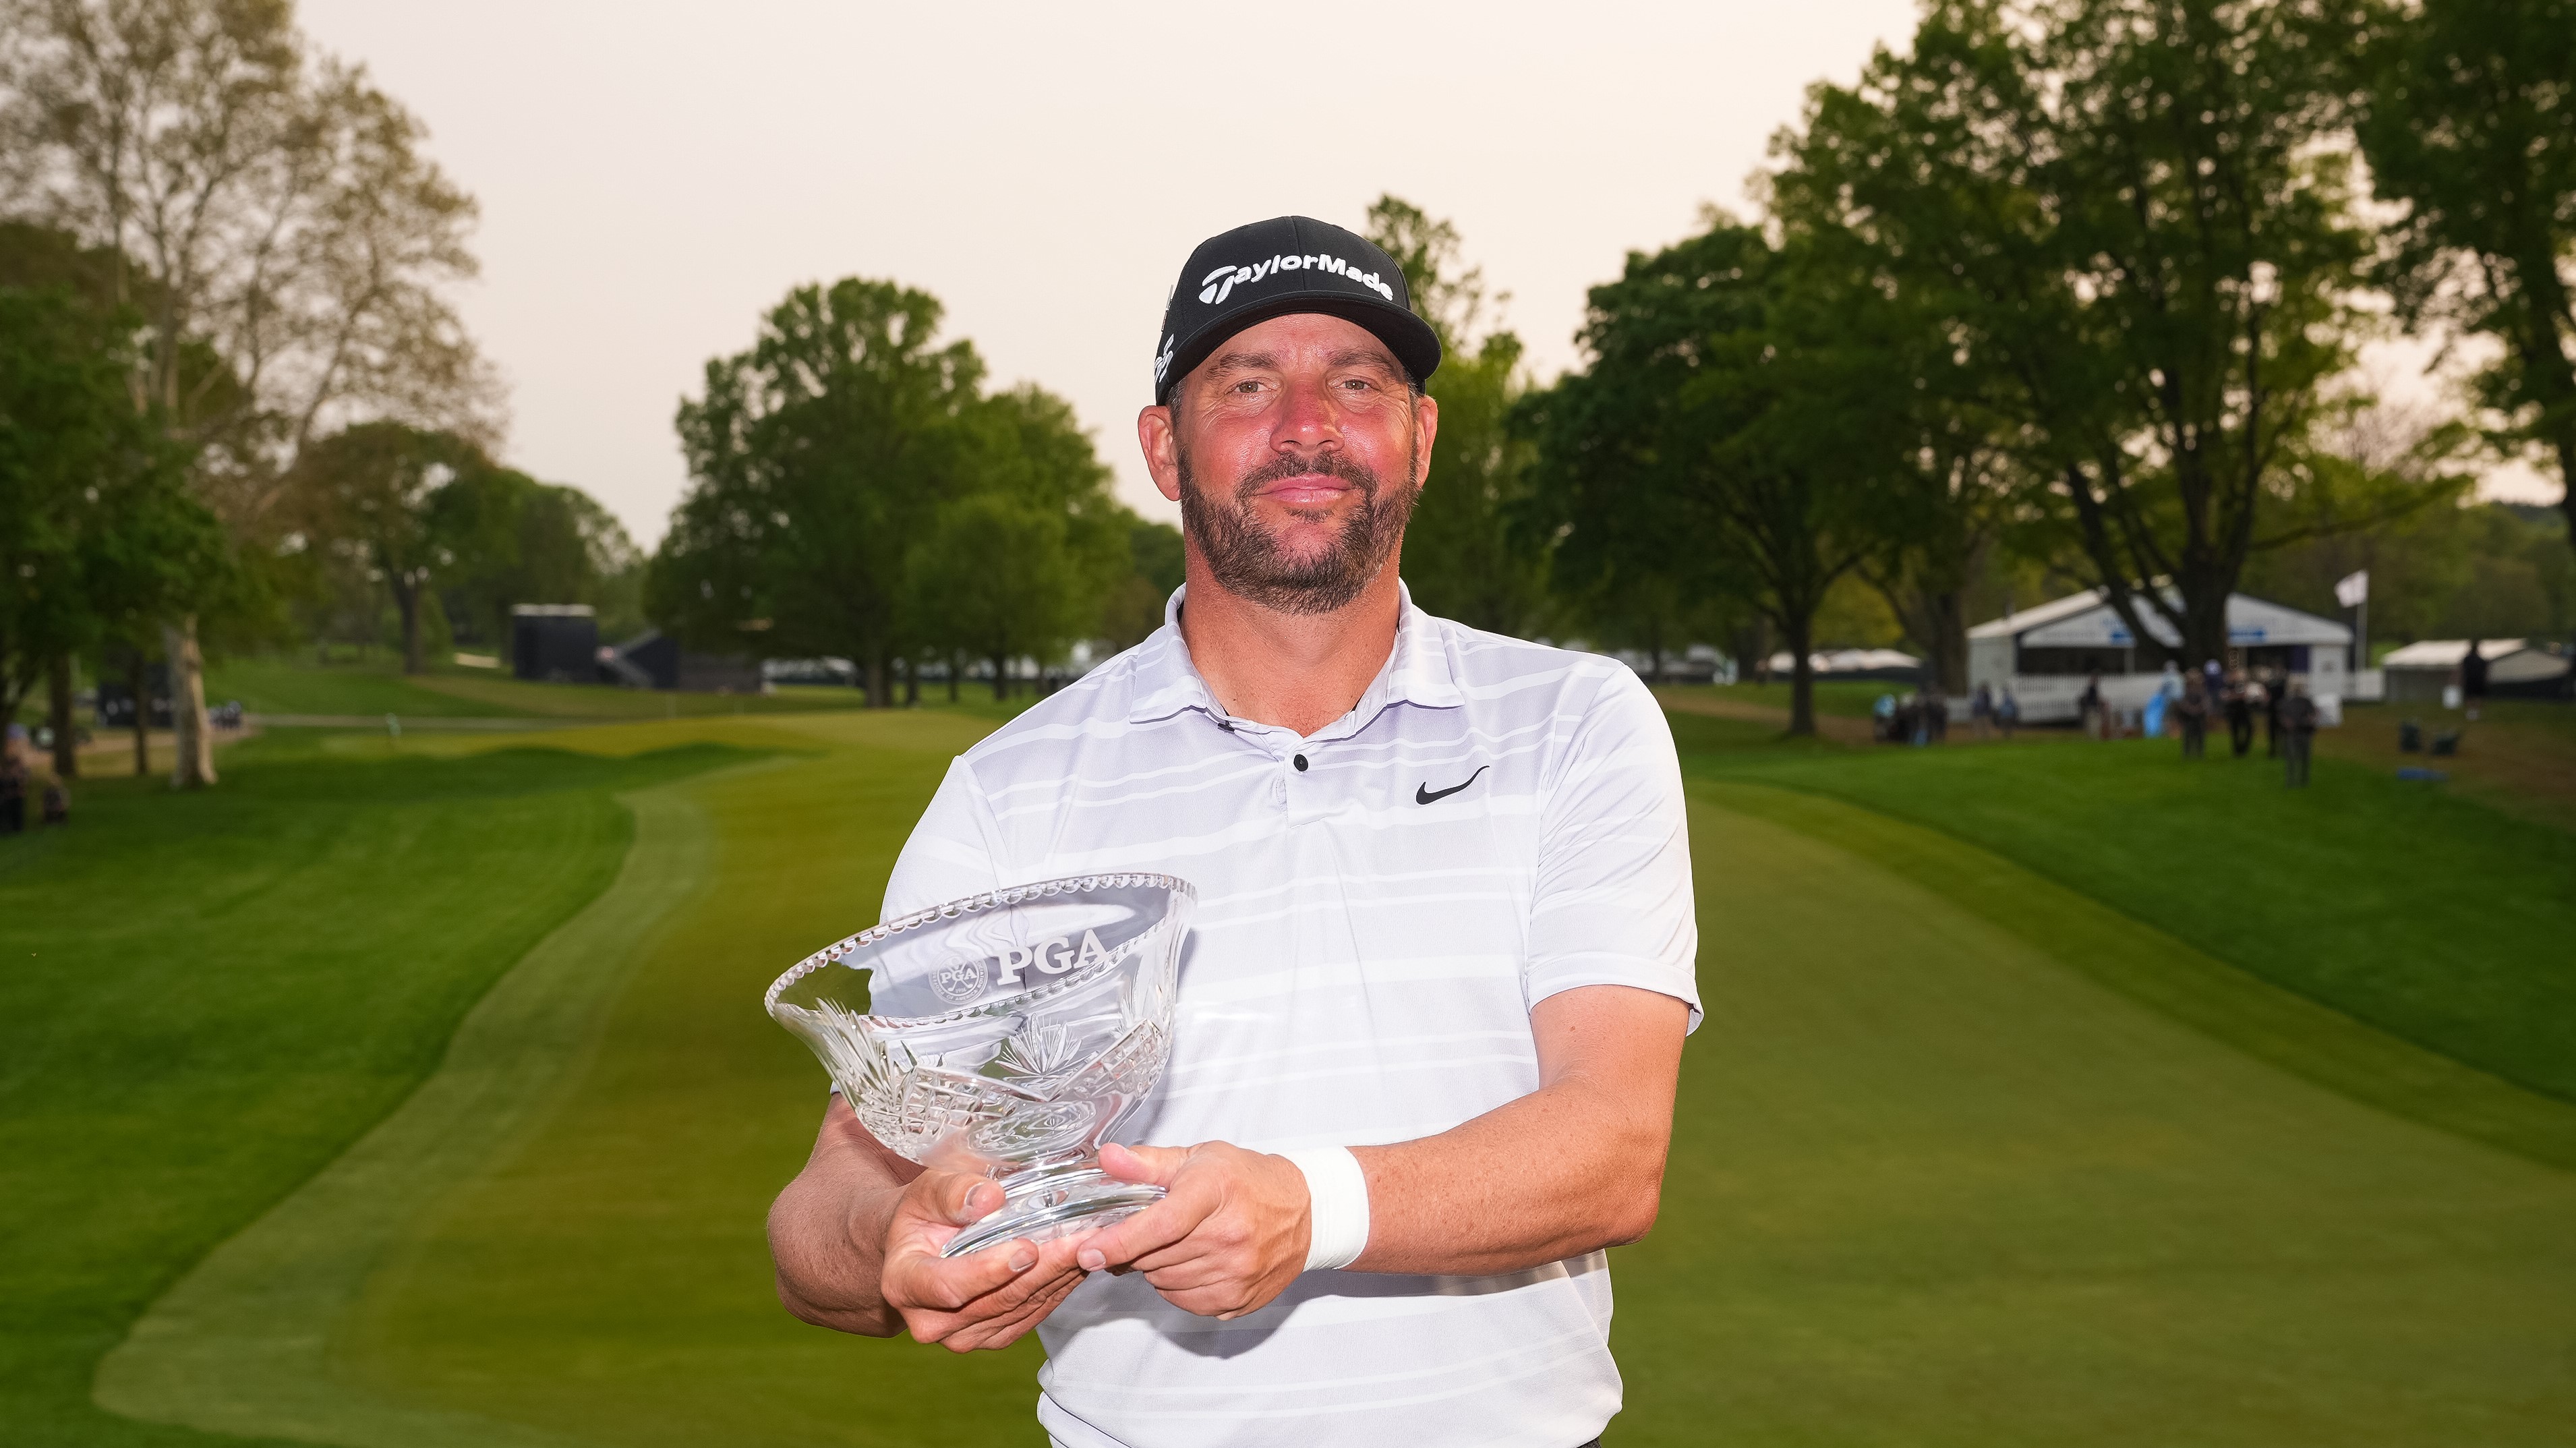 Congratulations to Michael Block on His Great Performance at the PGA Championship! T-15 and Low Club Pro!